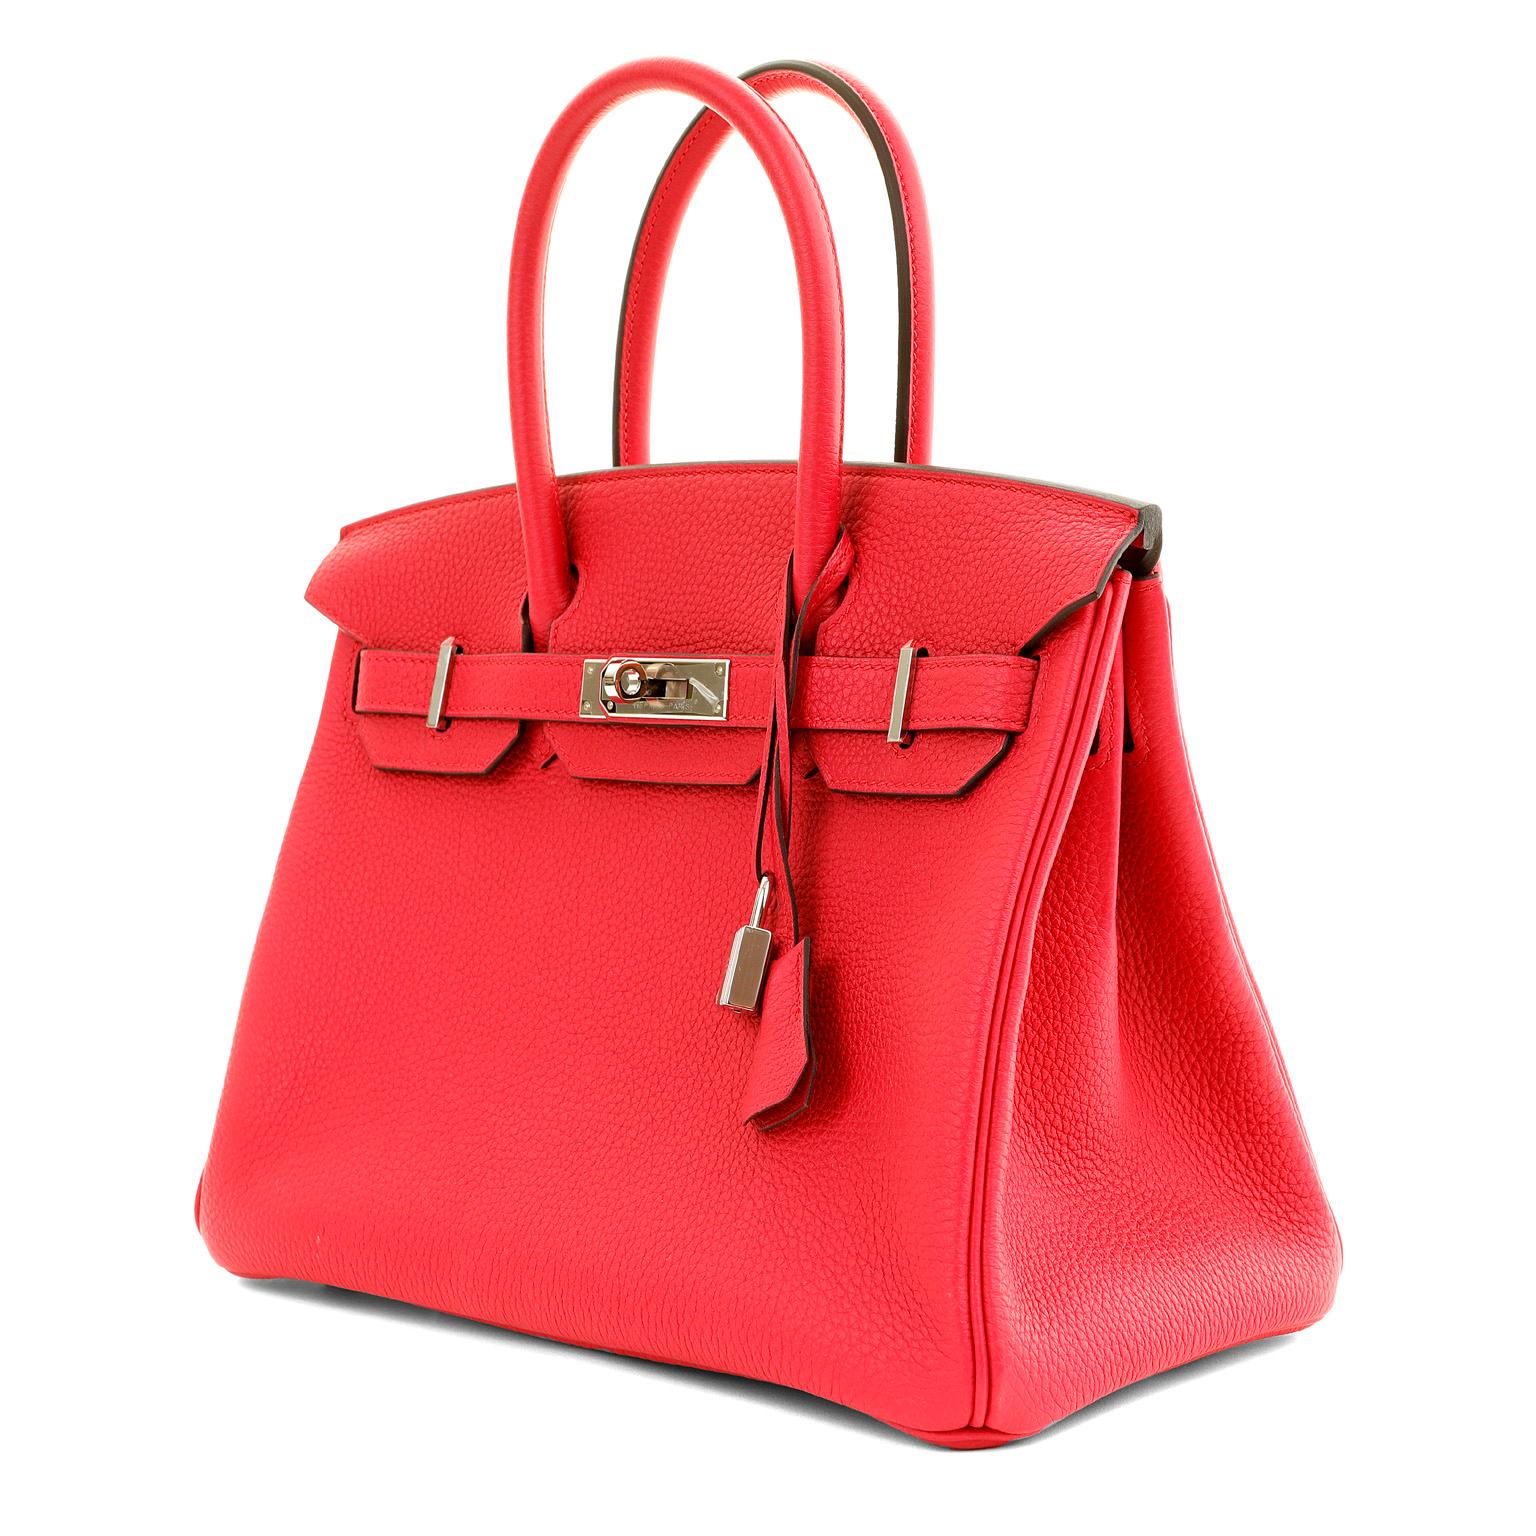 This authentic Hermès 30 cm Strawberry Togo Leather Birkin is in pristine unworn condition.  The protective plastic is on all the hardware and it is exquisite.
Togo is scratch resistant calf leather; it is textured with a wonderful grainy